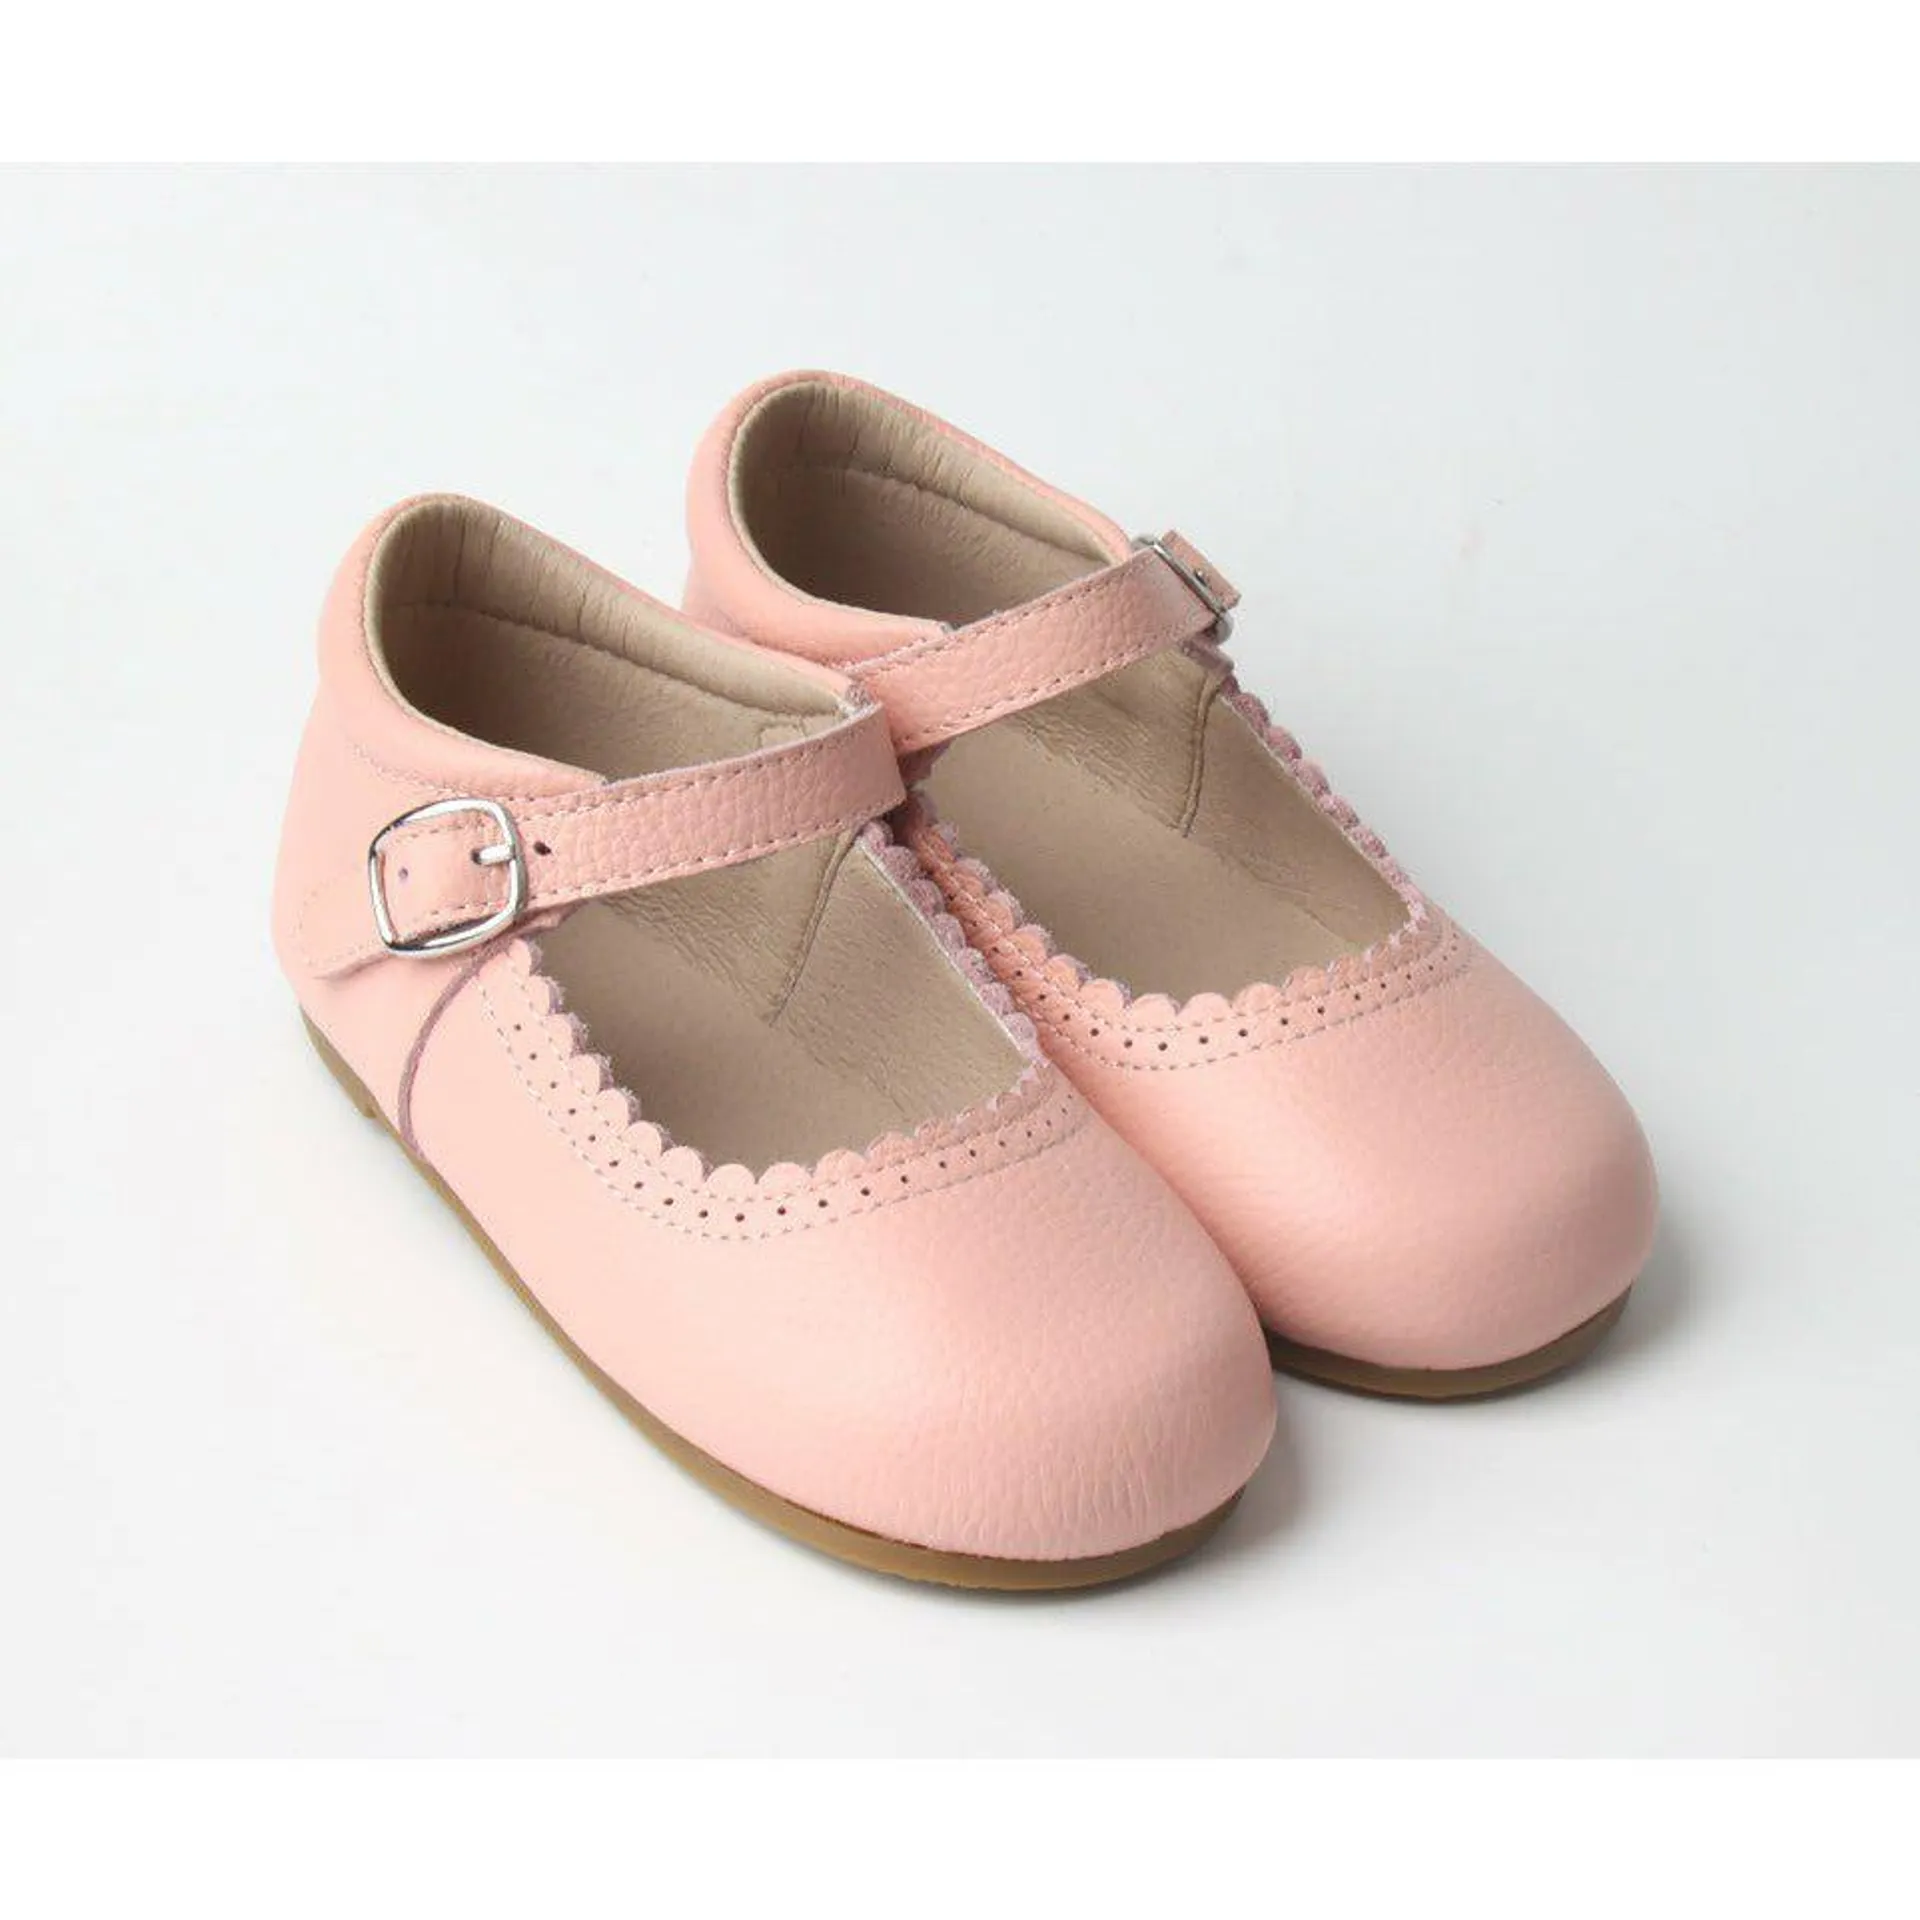 PINK MARY JANE SHOES